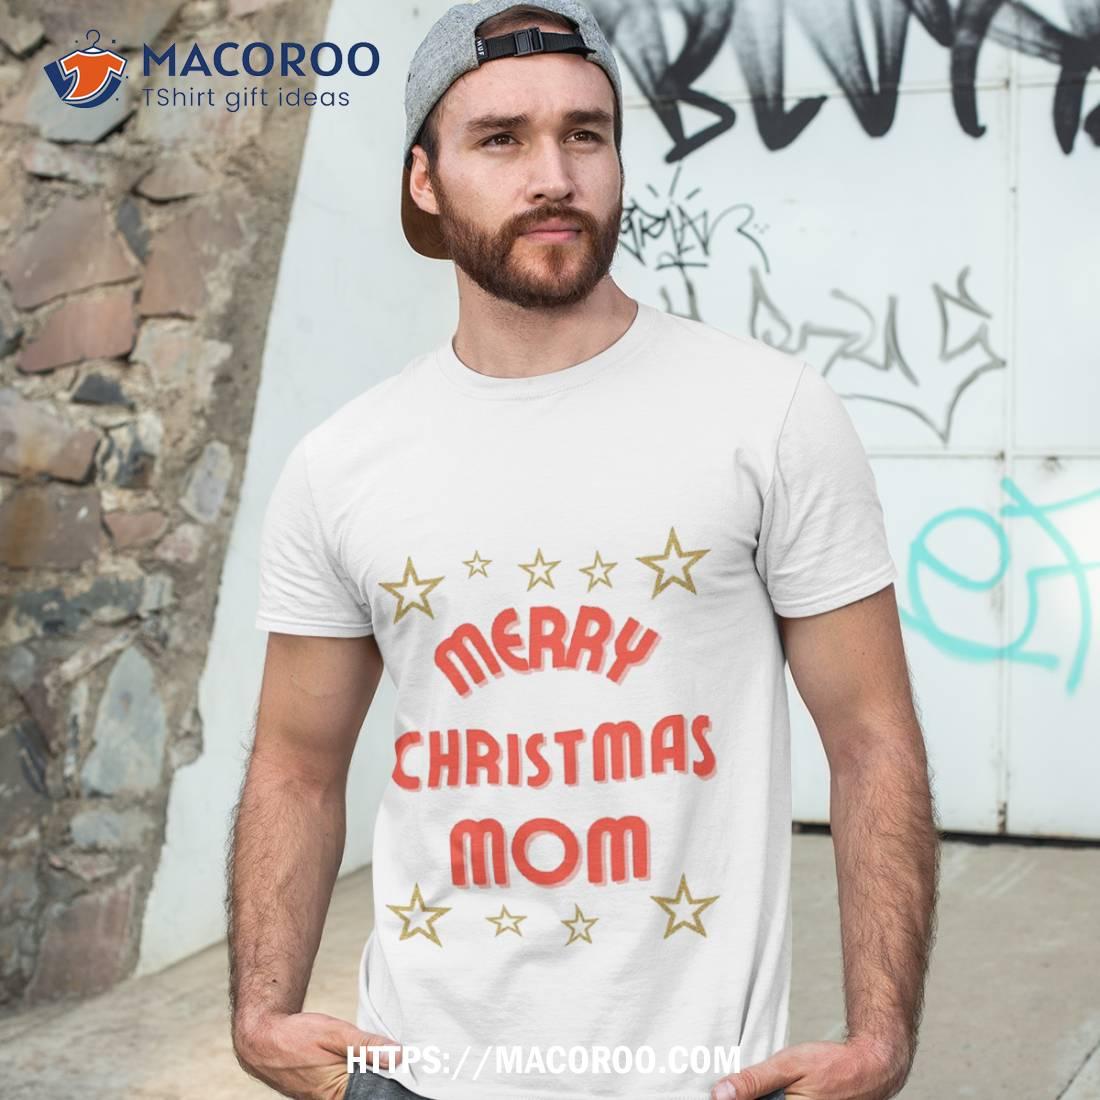 https://images.macoroo.com/wp-content/uploads/2023/08/merry-christmas-my-family-shirt-thoughtful-christmas-gifts-for-mom-tshirt-3.jpg